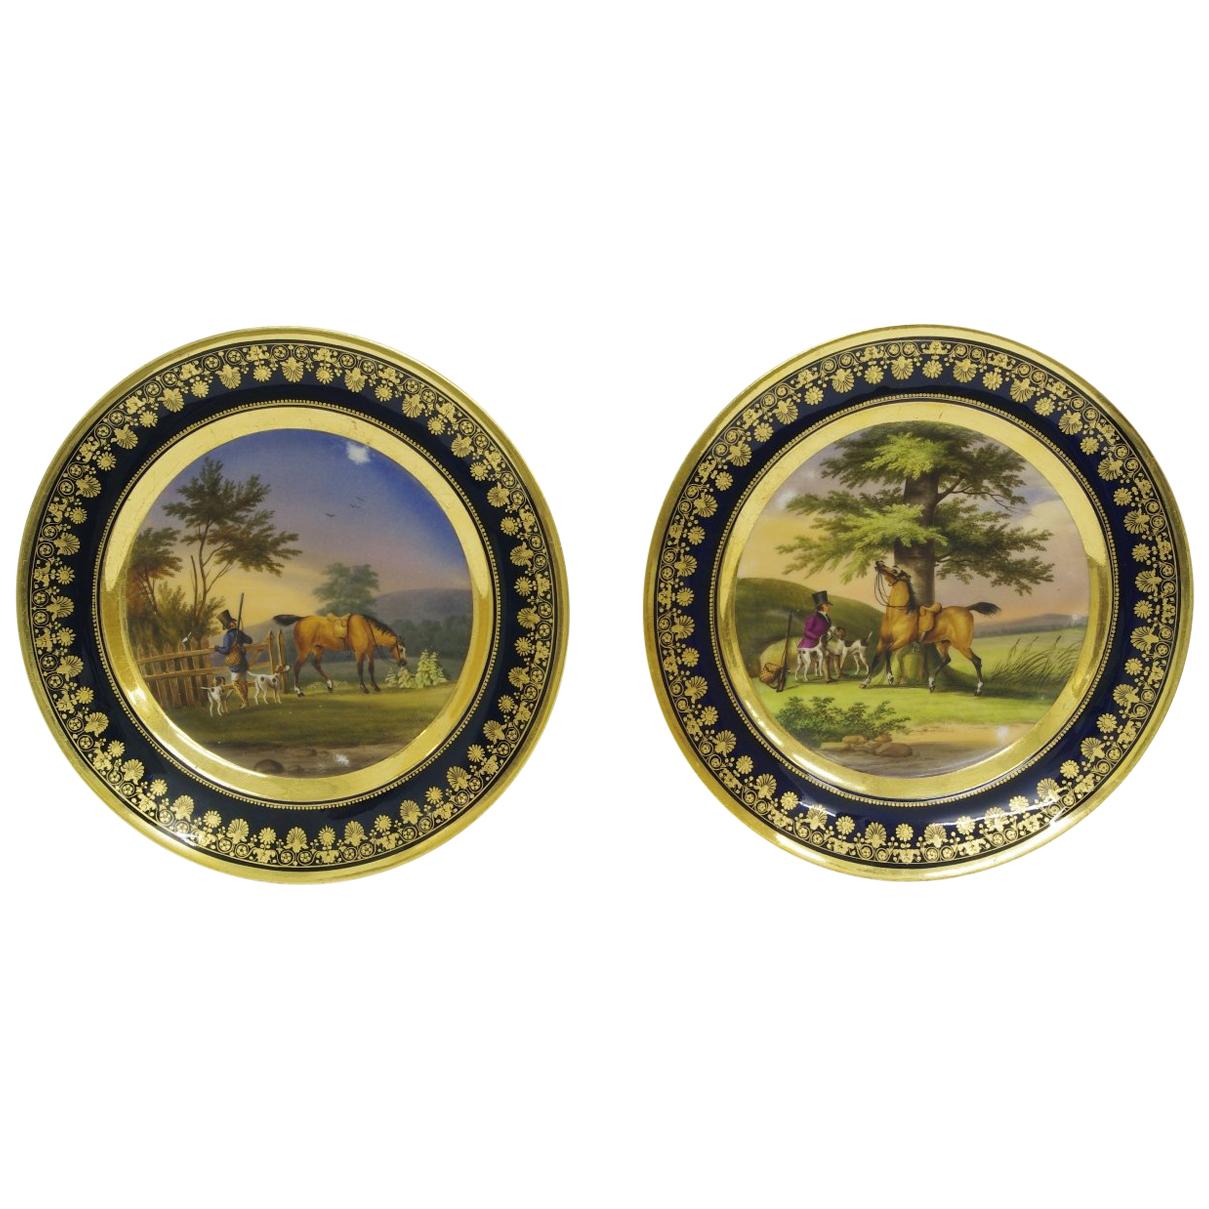 Pair of Old Pairs Porcelain Cabinet Plates, circa 1820